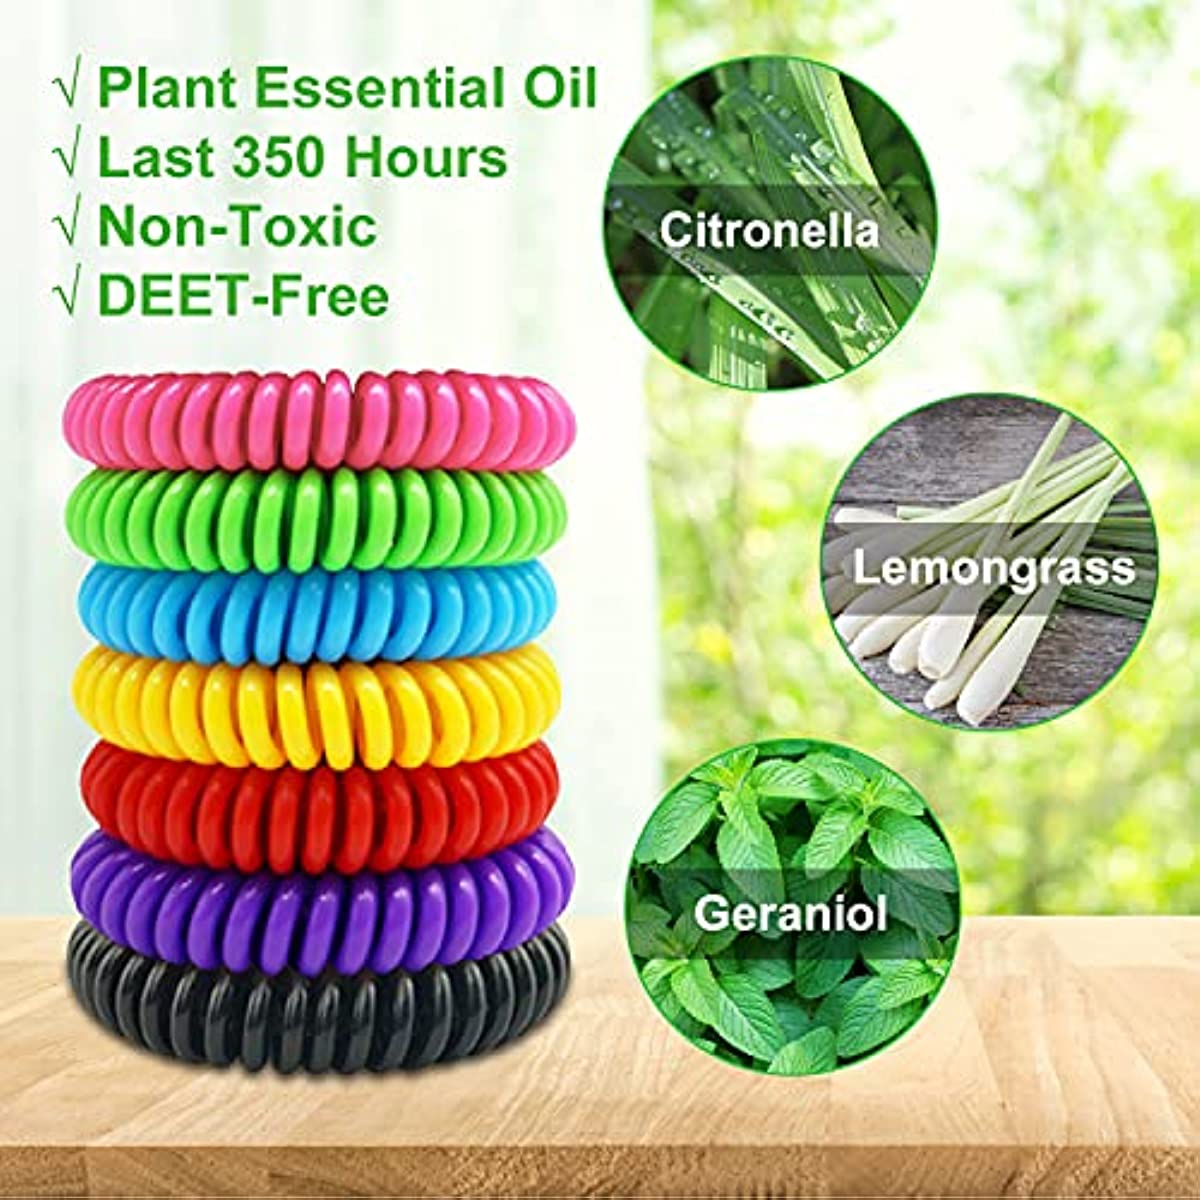 Mosquito Repellent Bracelets, 21 Pack Individually Wrapped Waterproof Insect Bug Repellent Wristbands for Kids Adults Outdoor Camping Fishing Traveling